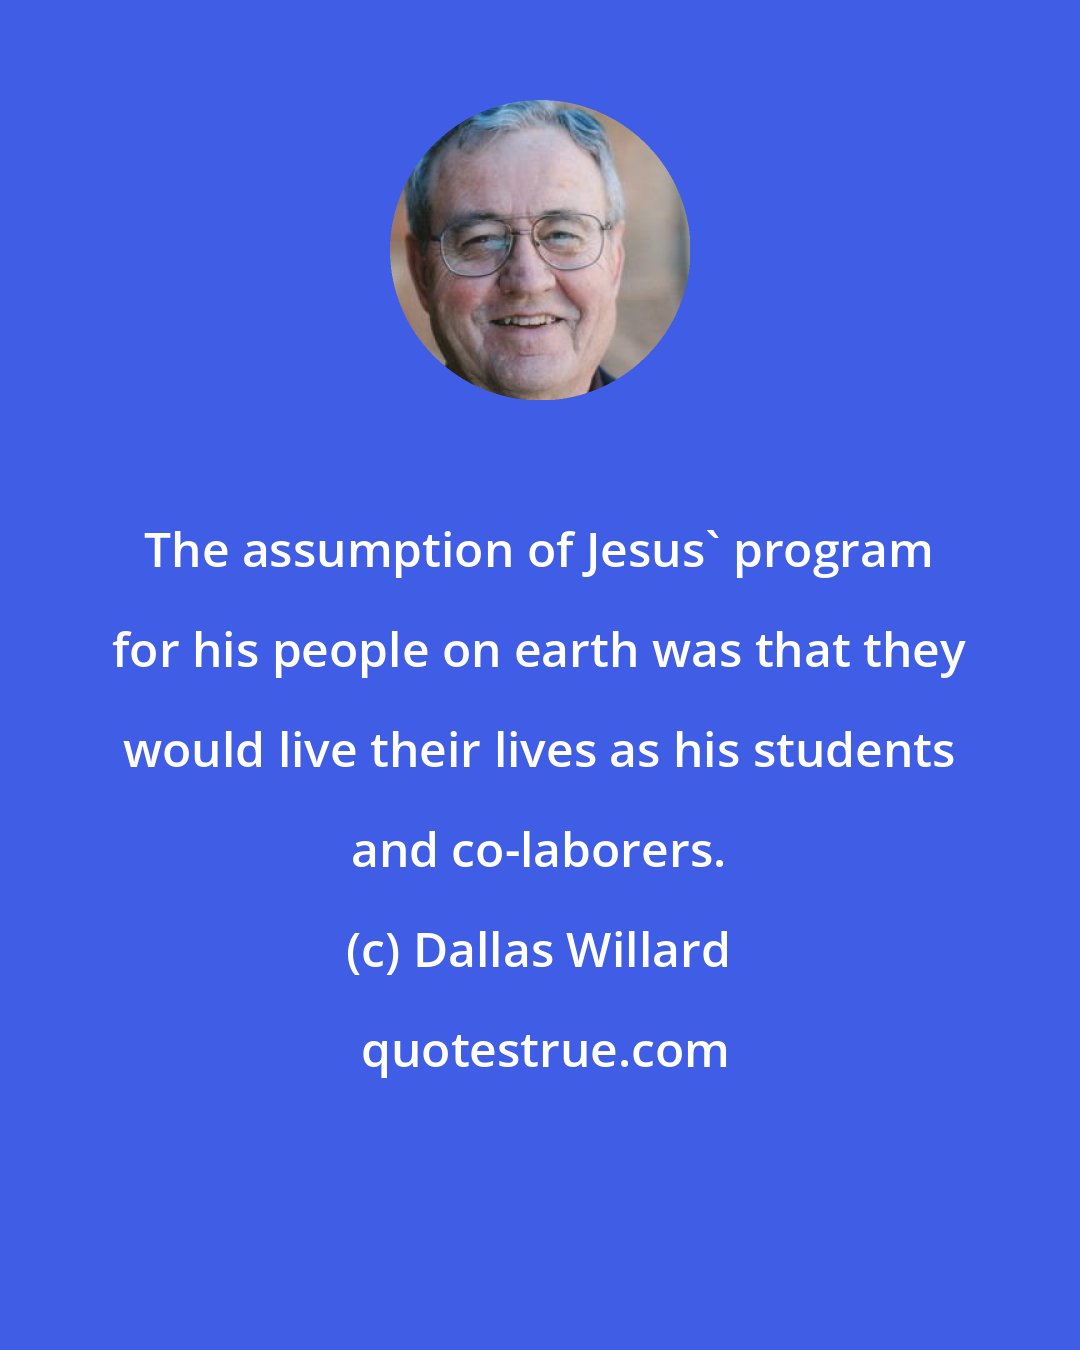 Dallas Willard: The assumption of Jesus' program for his people on earth was that they would live their lives as his students and co-laborers.